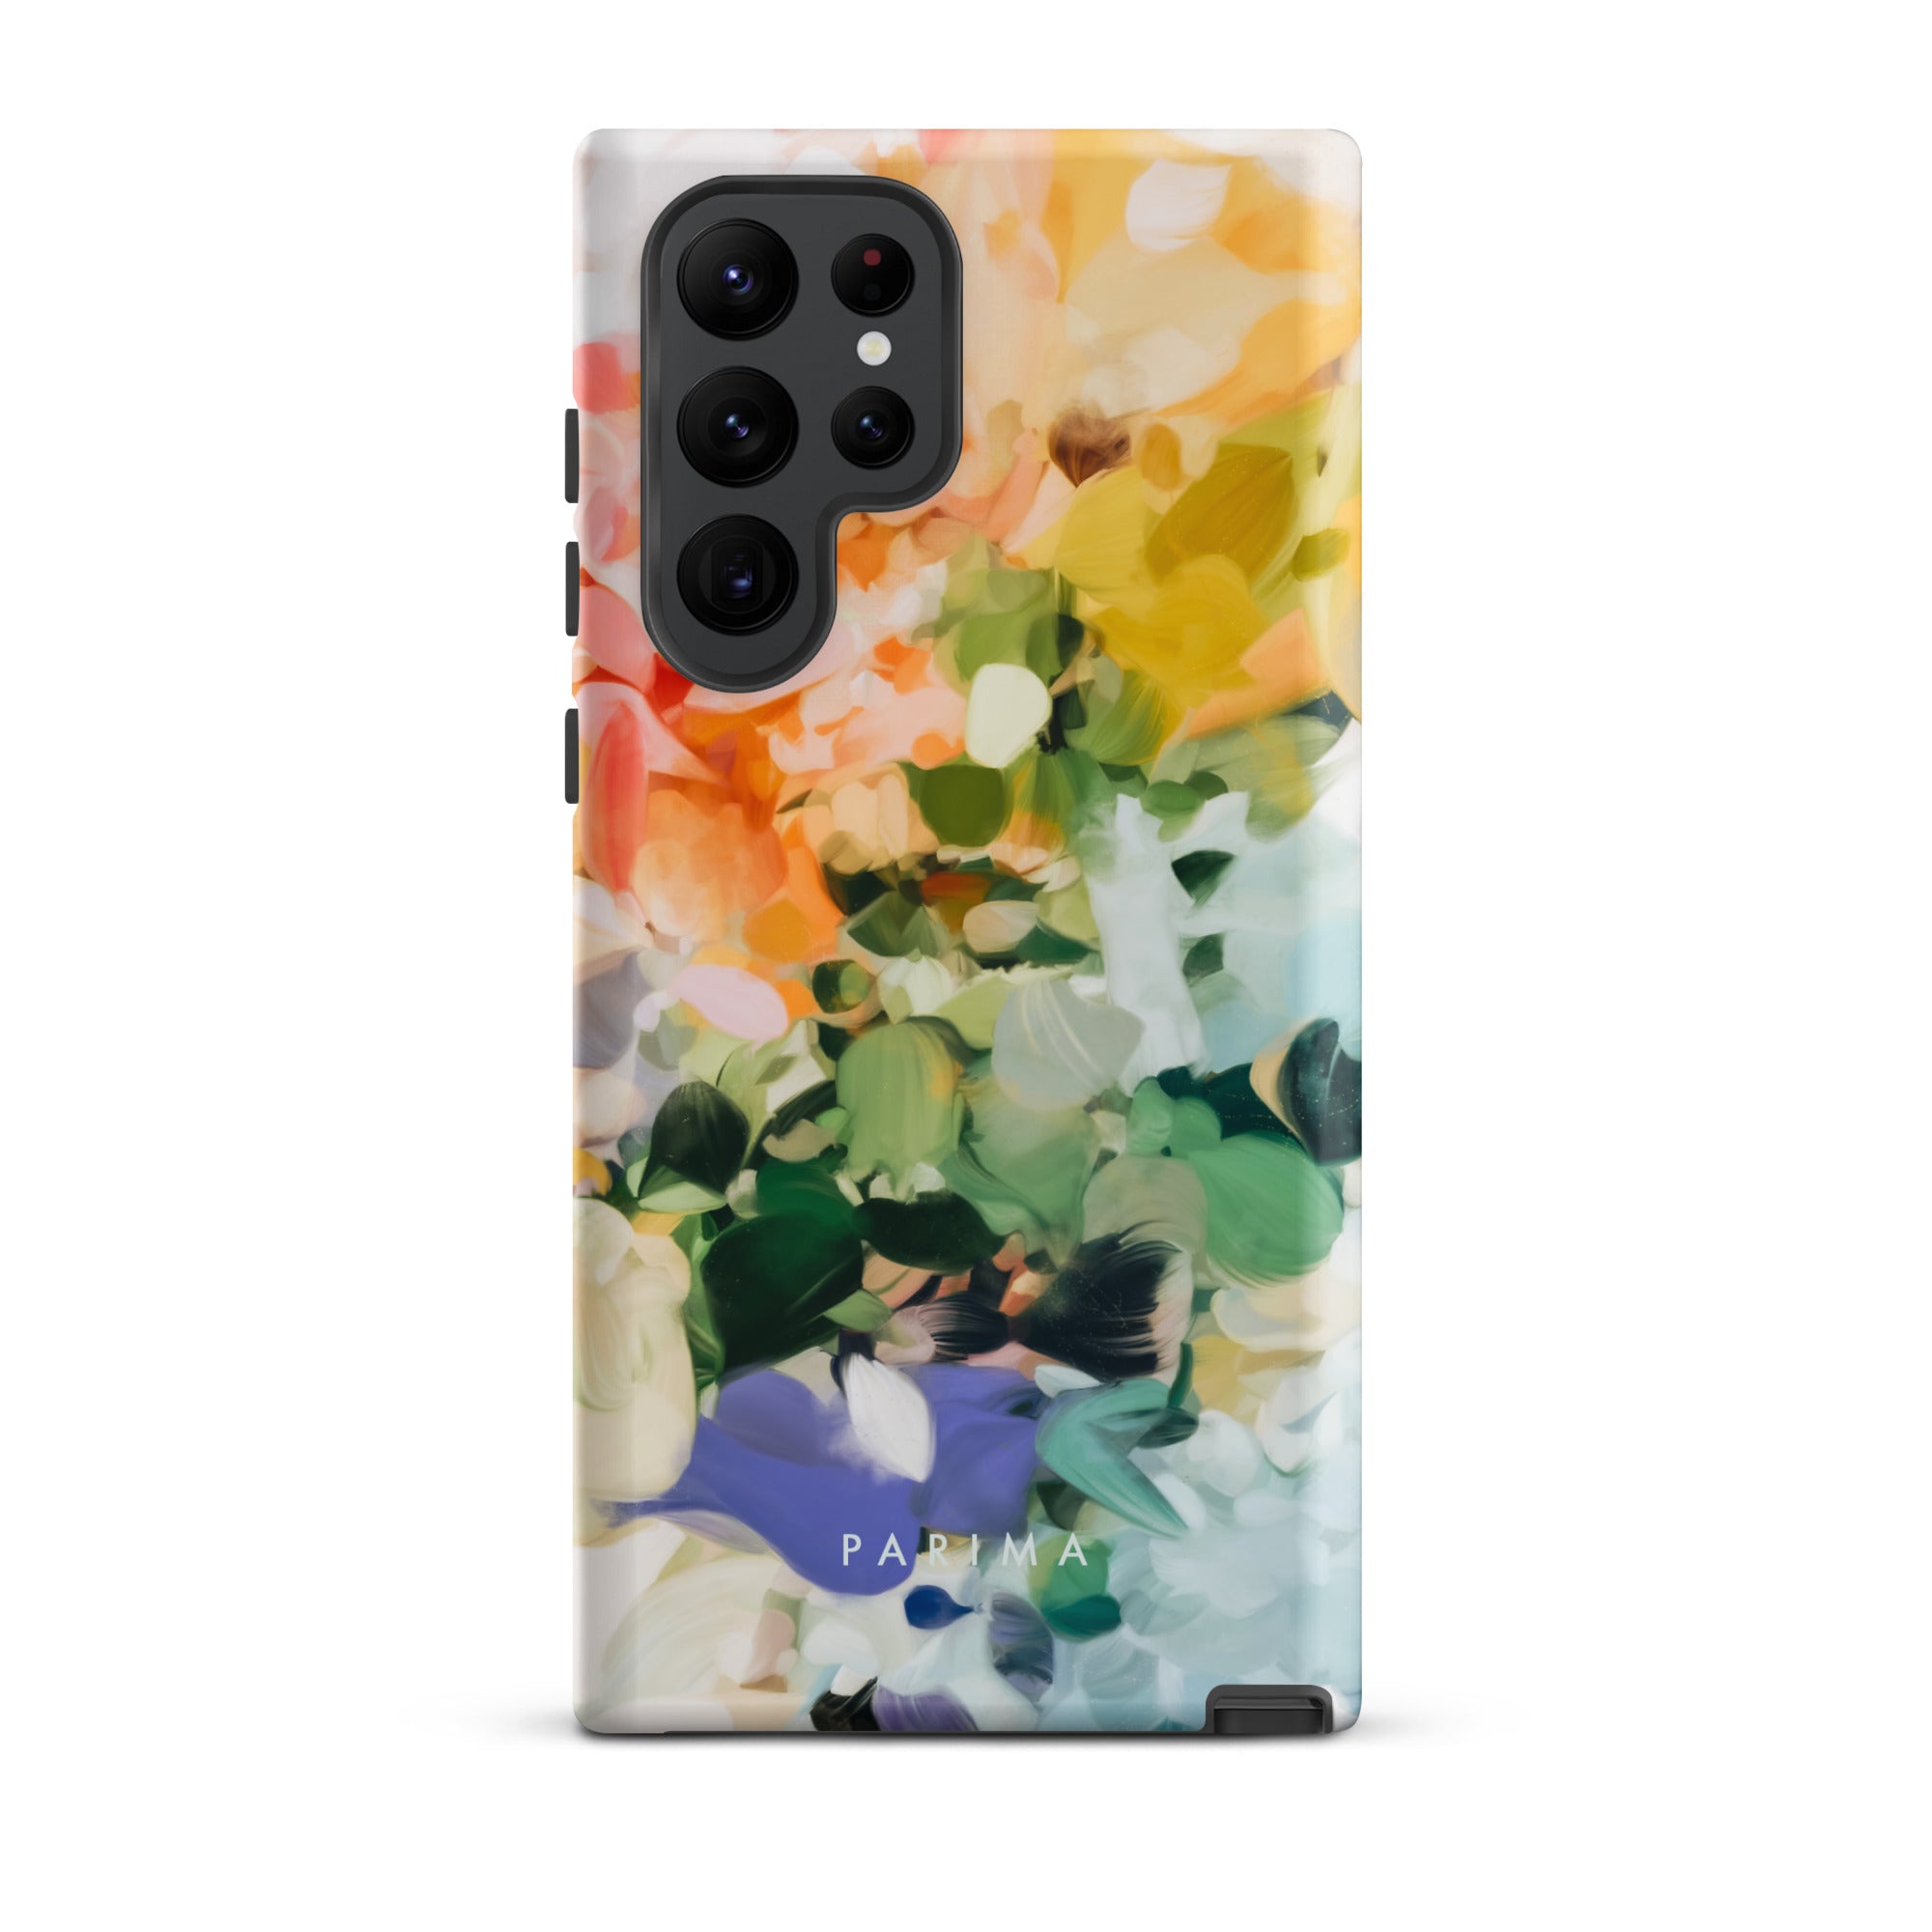 June, green and yellow abstract art on Samsung Galaxy S22 Ultra tough case by Parima Studio